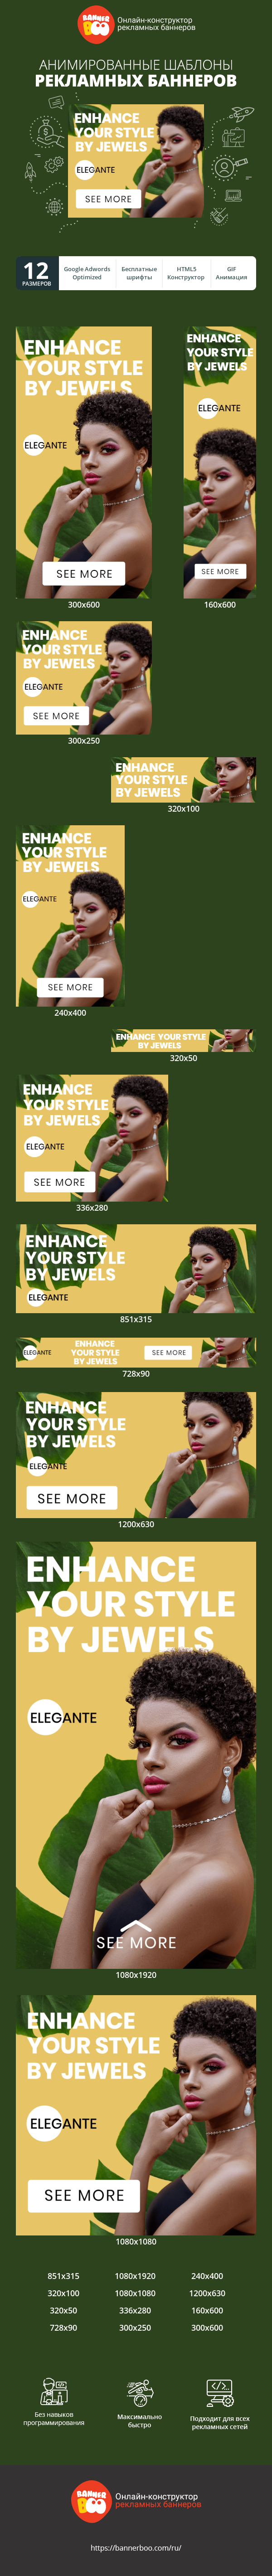 Banner ad template — Enhance Your Style By Jewels — Jewelry Store